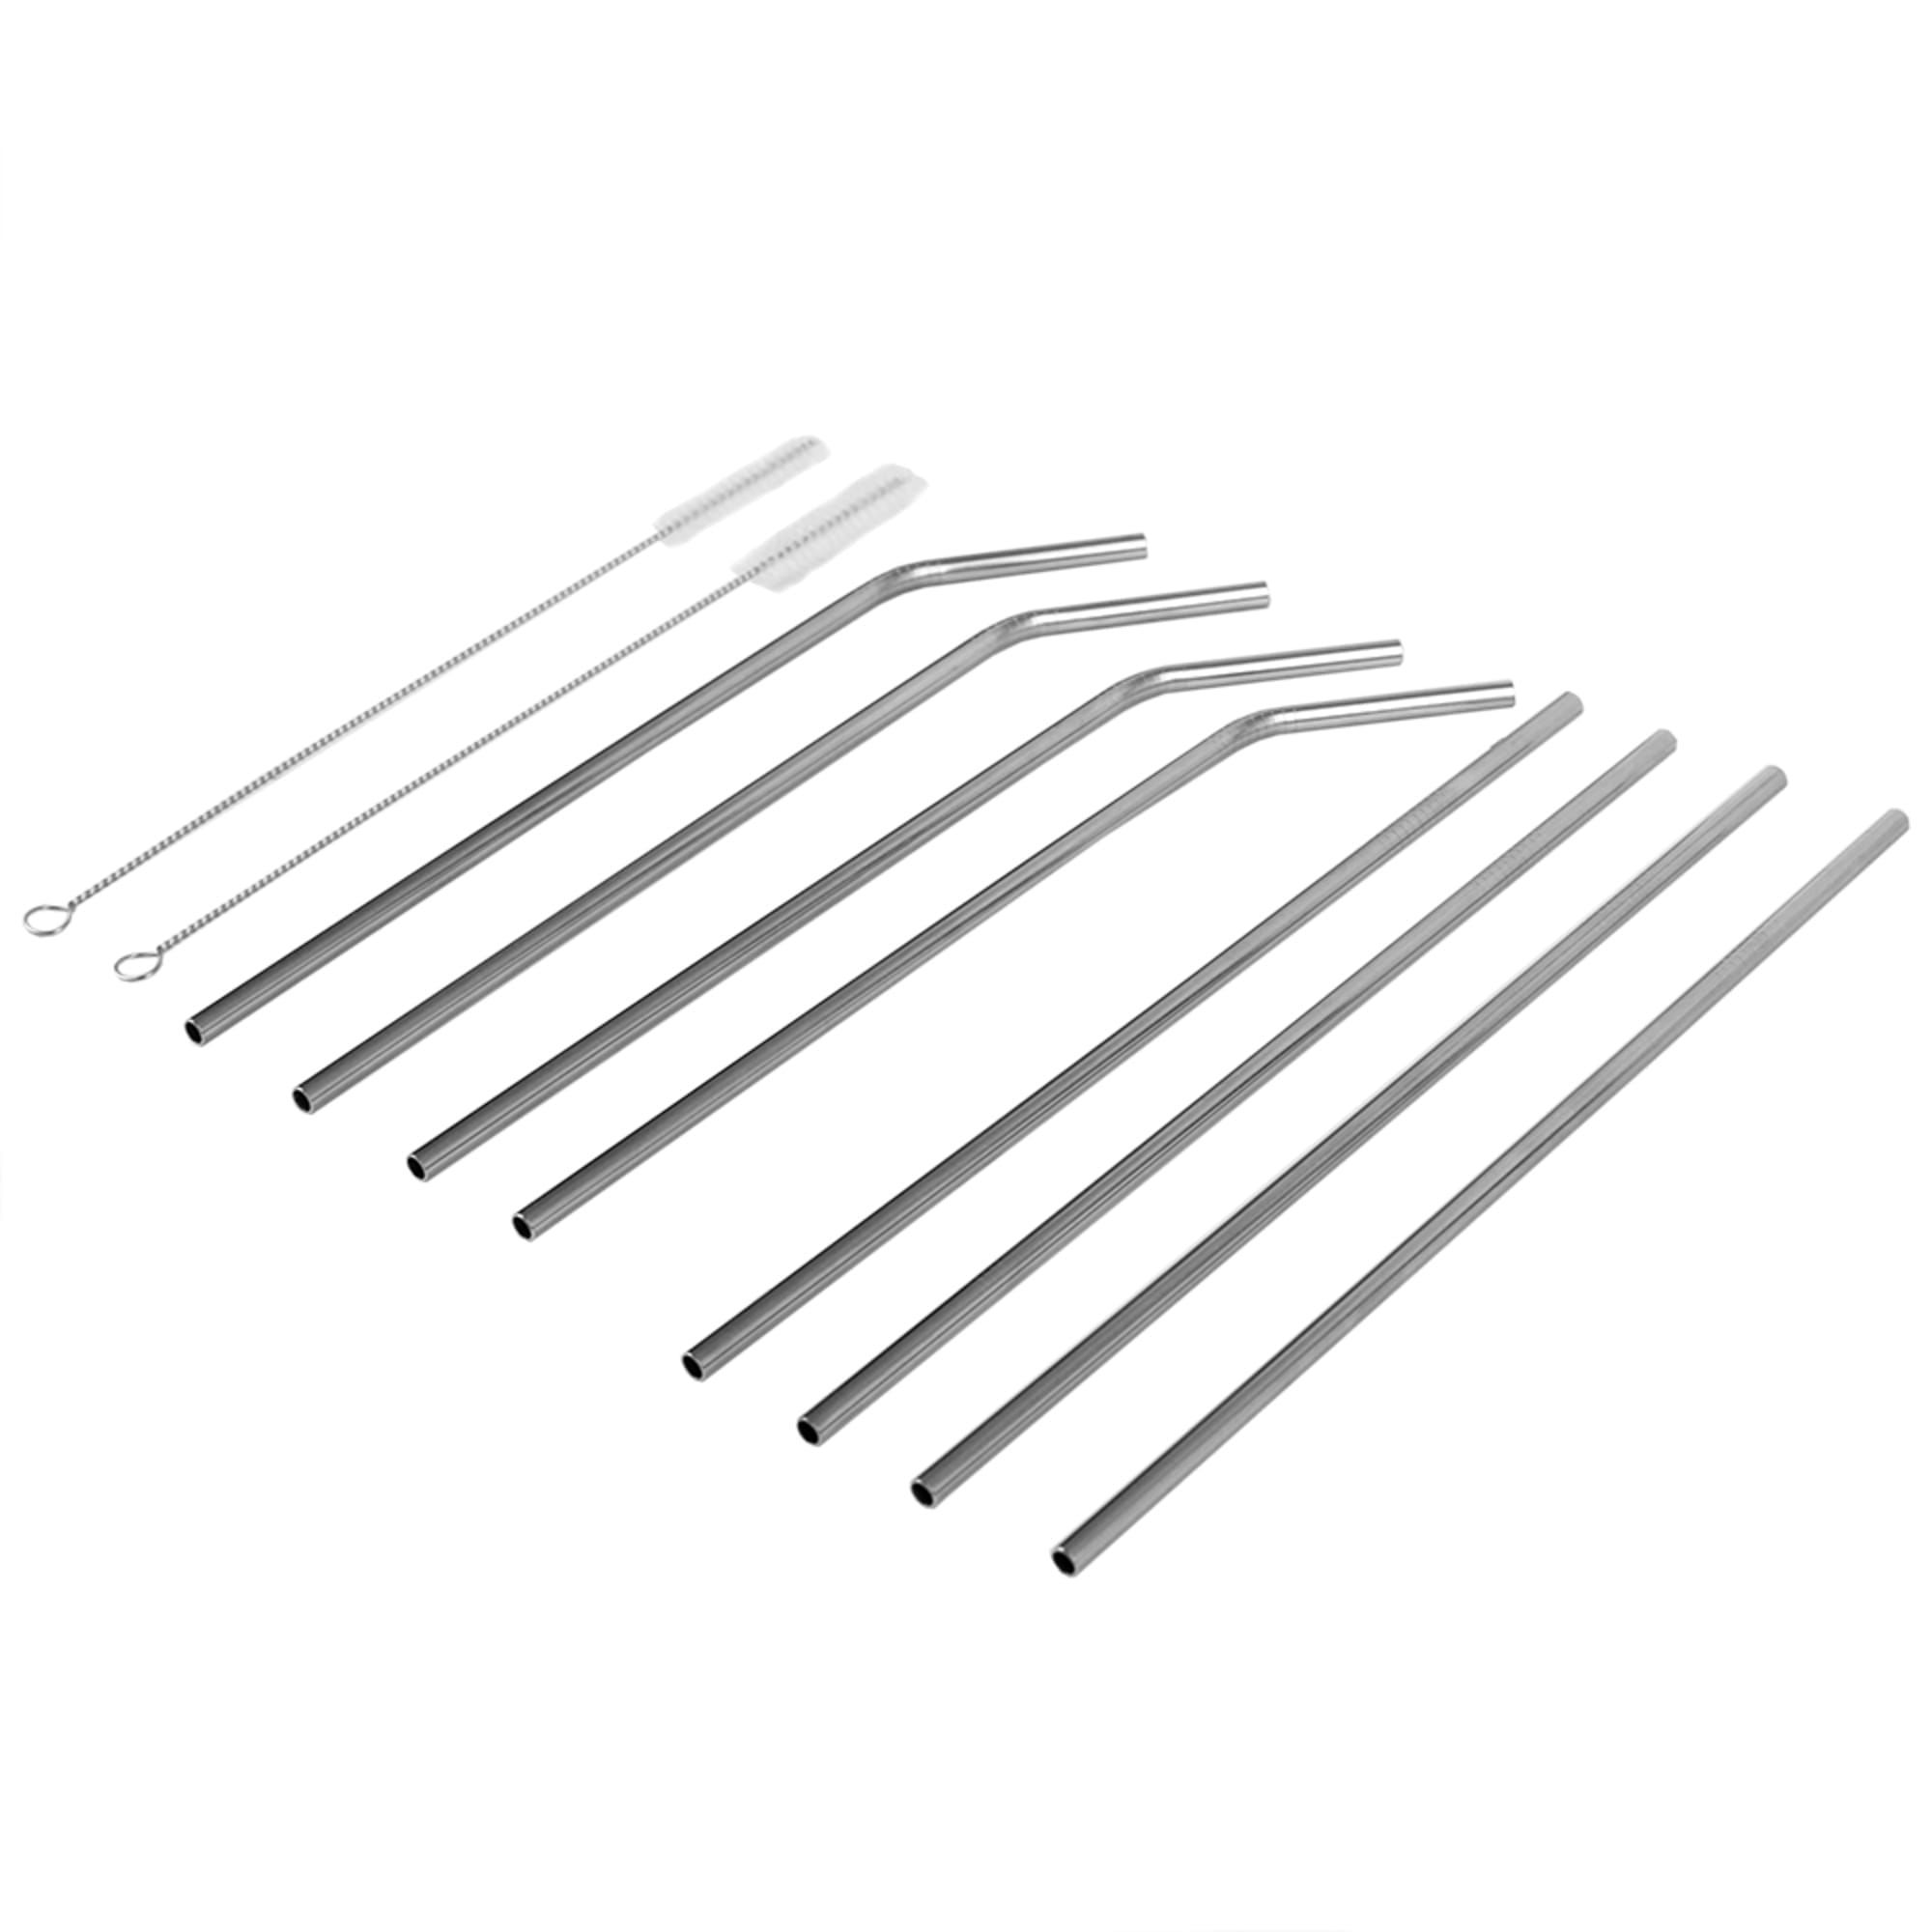 Home Basics 10 Piece Reusable Stainless Steel Drinking Straw Set, Silver $4.00 EACH, CASE PACK OF 24